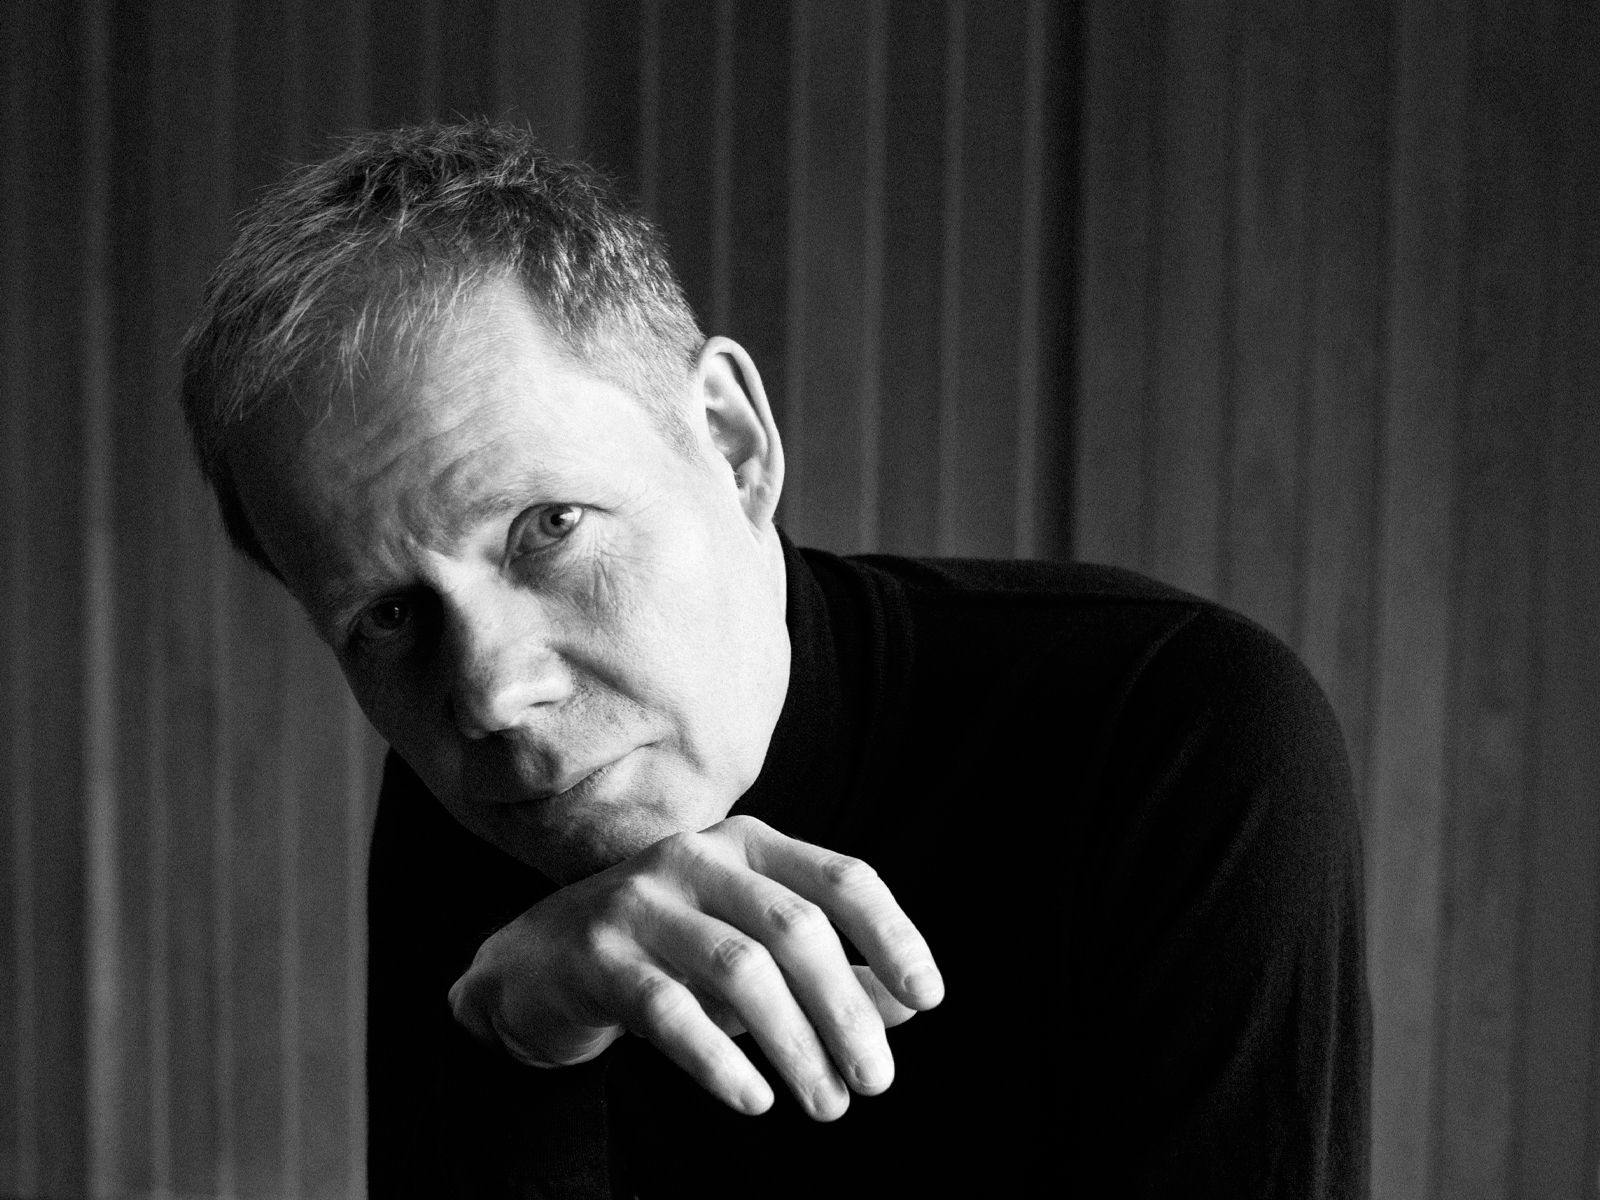 Max Richter poses, his chin resting on his hand.